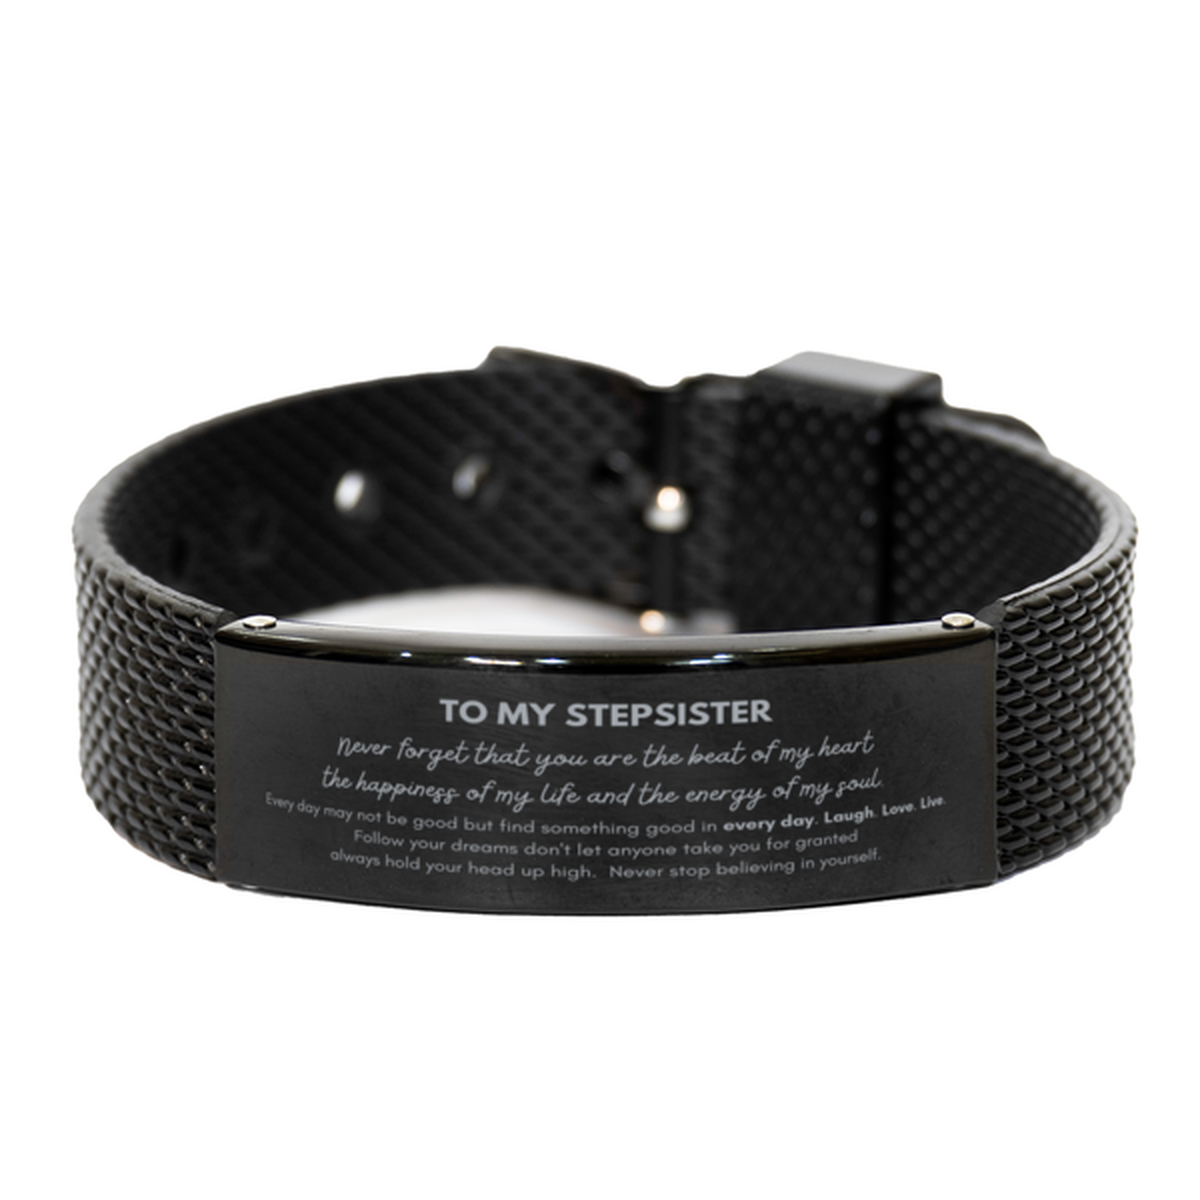 To My Stepsister Bracelet Gifts, Christmas Stepsister Black Shark Mesh Bracelet Present, Birthday Unique Motivational For Stepsister, To My Stepsister Never forget that you are the beat of my heart the happiness of my life and the energy of my soul